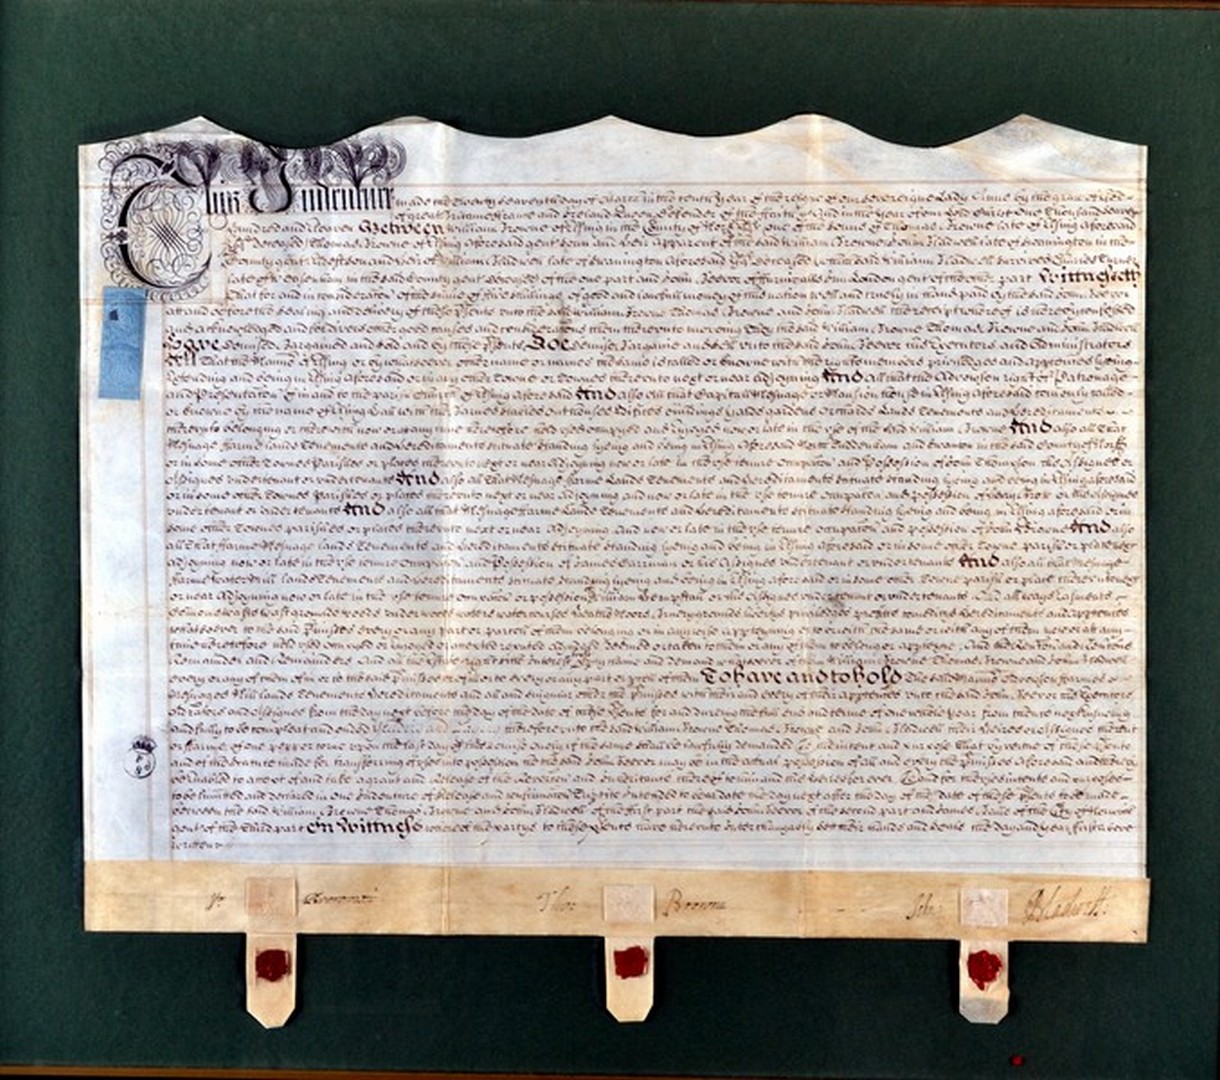 A framed Queen Anne indenture, dated 1711, between William Browne, Thomas Browne and John